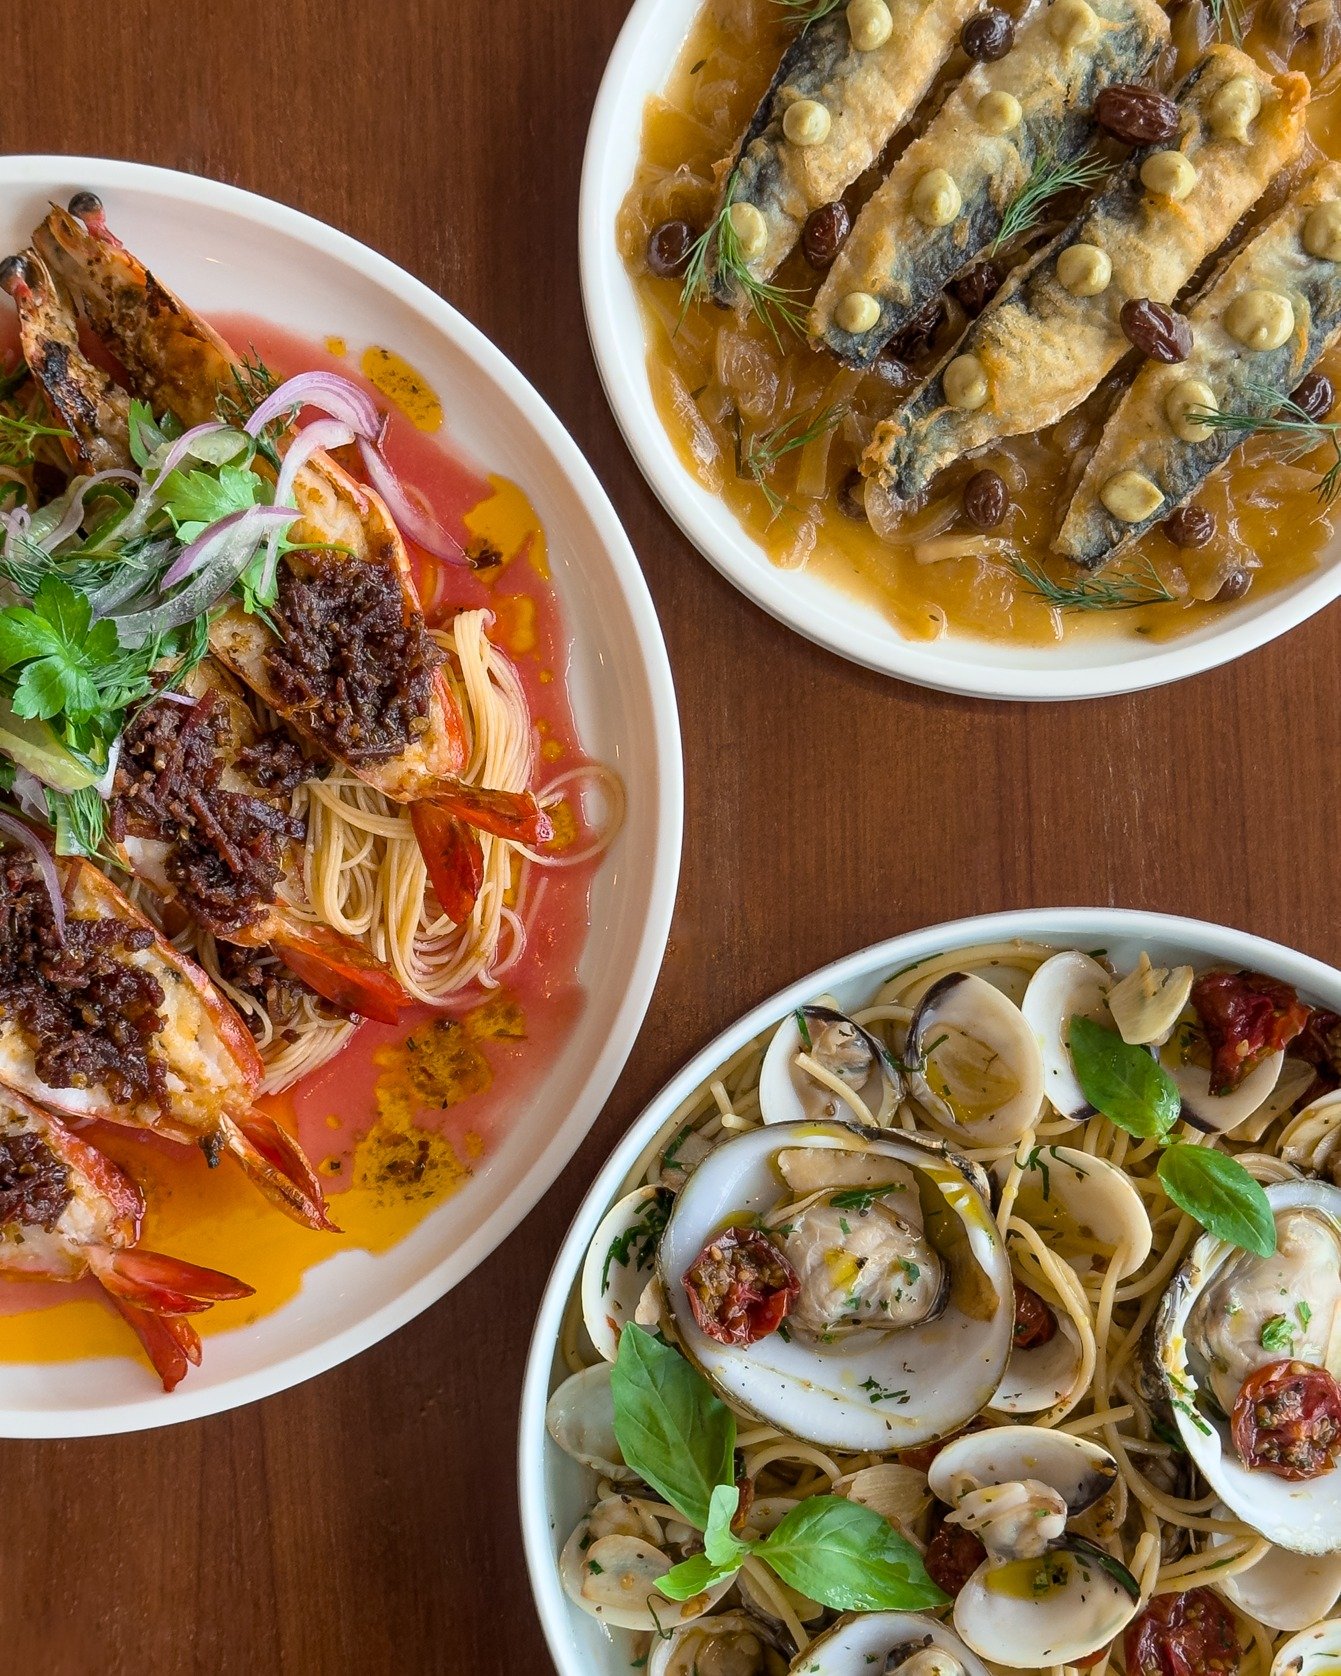 Seafood Riviera returns to Caffe Fernet on Vesak Day, 22 May! For five days till 26 May, come and relish a seafood feast that'll transport you to the Italian Riviera. 

Treat yourself to the Venetian Style Sardines, sweet and sour with onion and rais